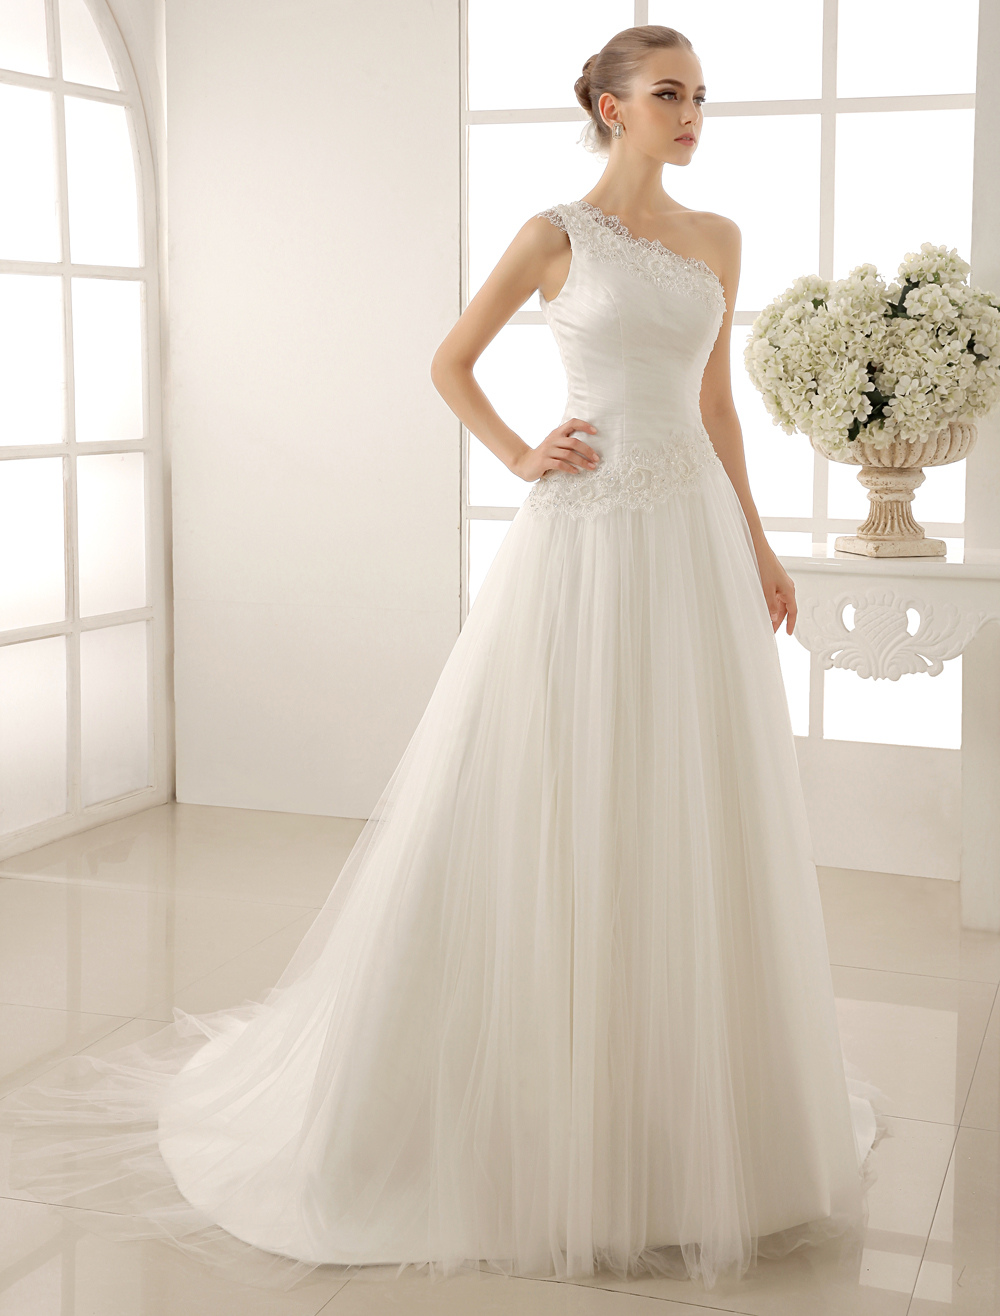 One-Shoulder Wedding Dress With Sequined Tulle - Milanoo.com